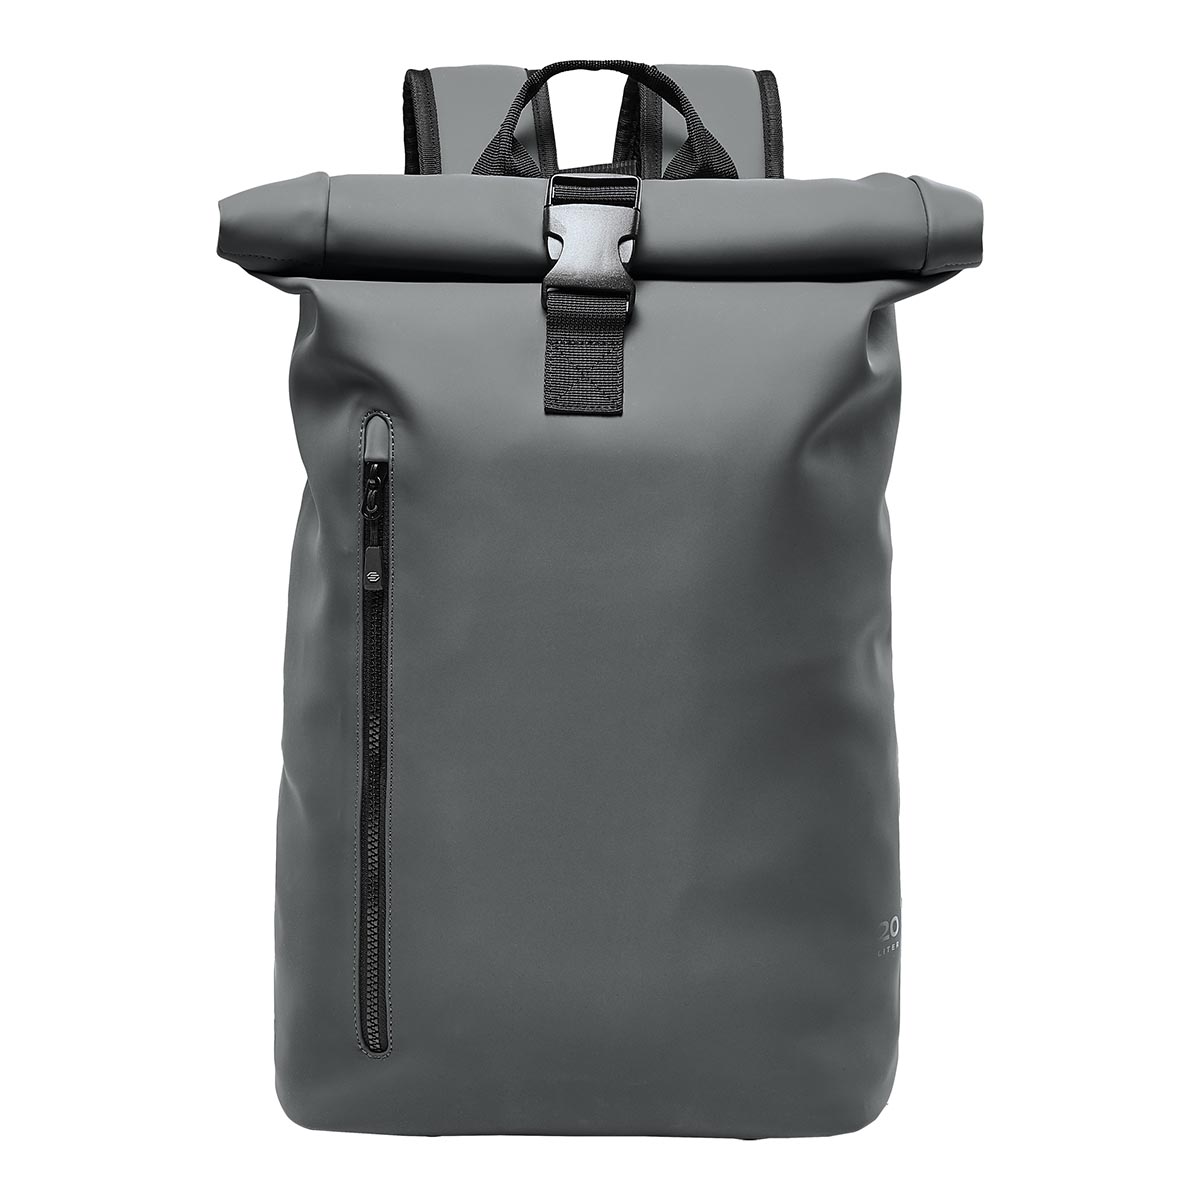 Sargasso Backpack - All Around Active